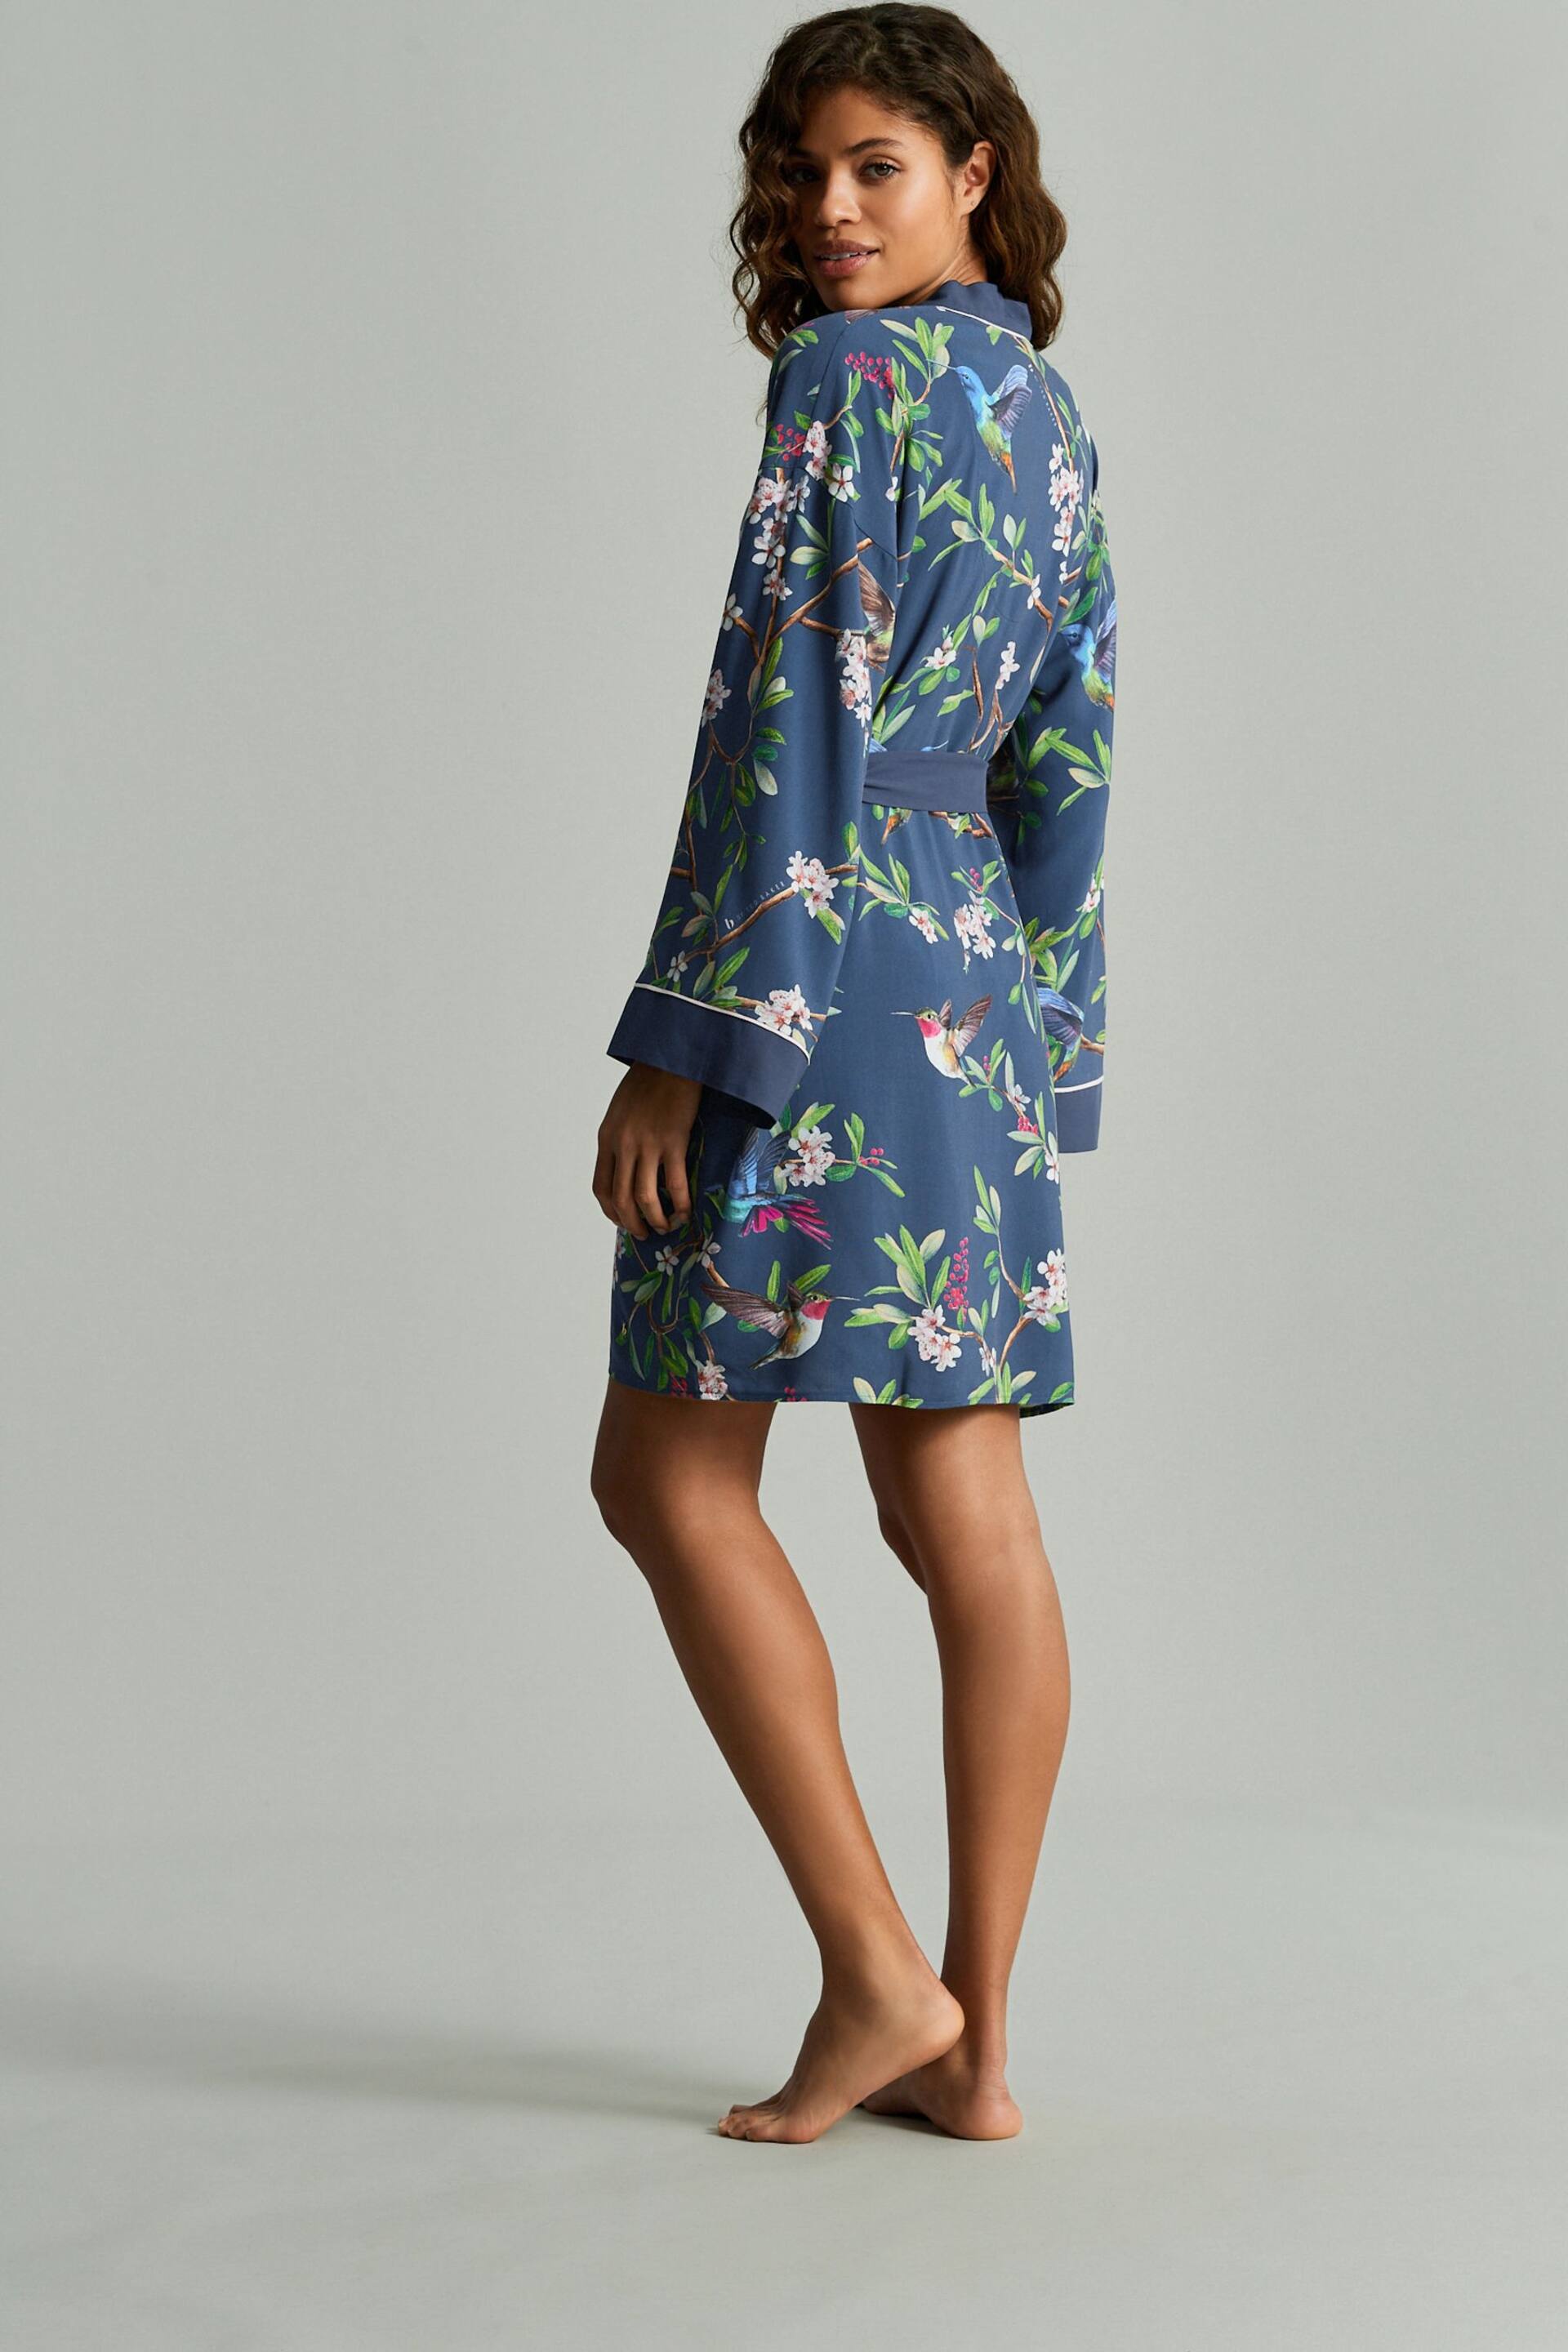 B by Ted Baker Charcoal Navy Bird Viscose Robe - Image 7 of 12